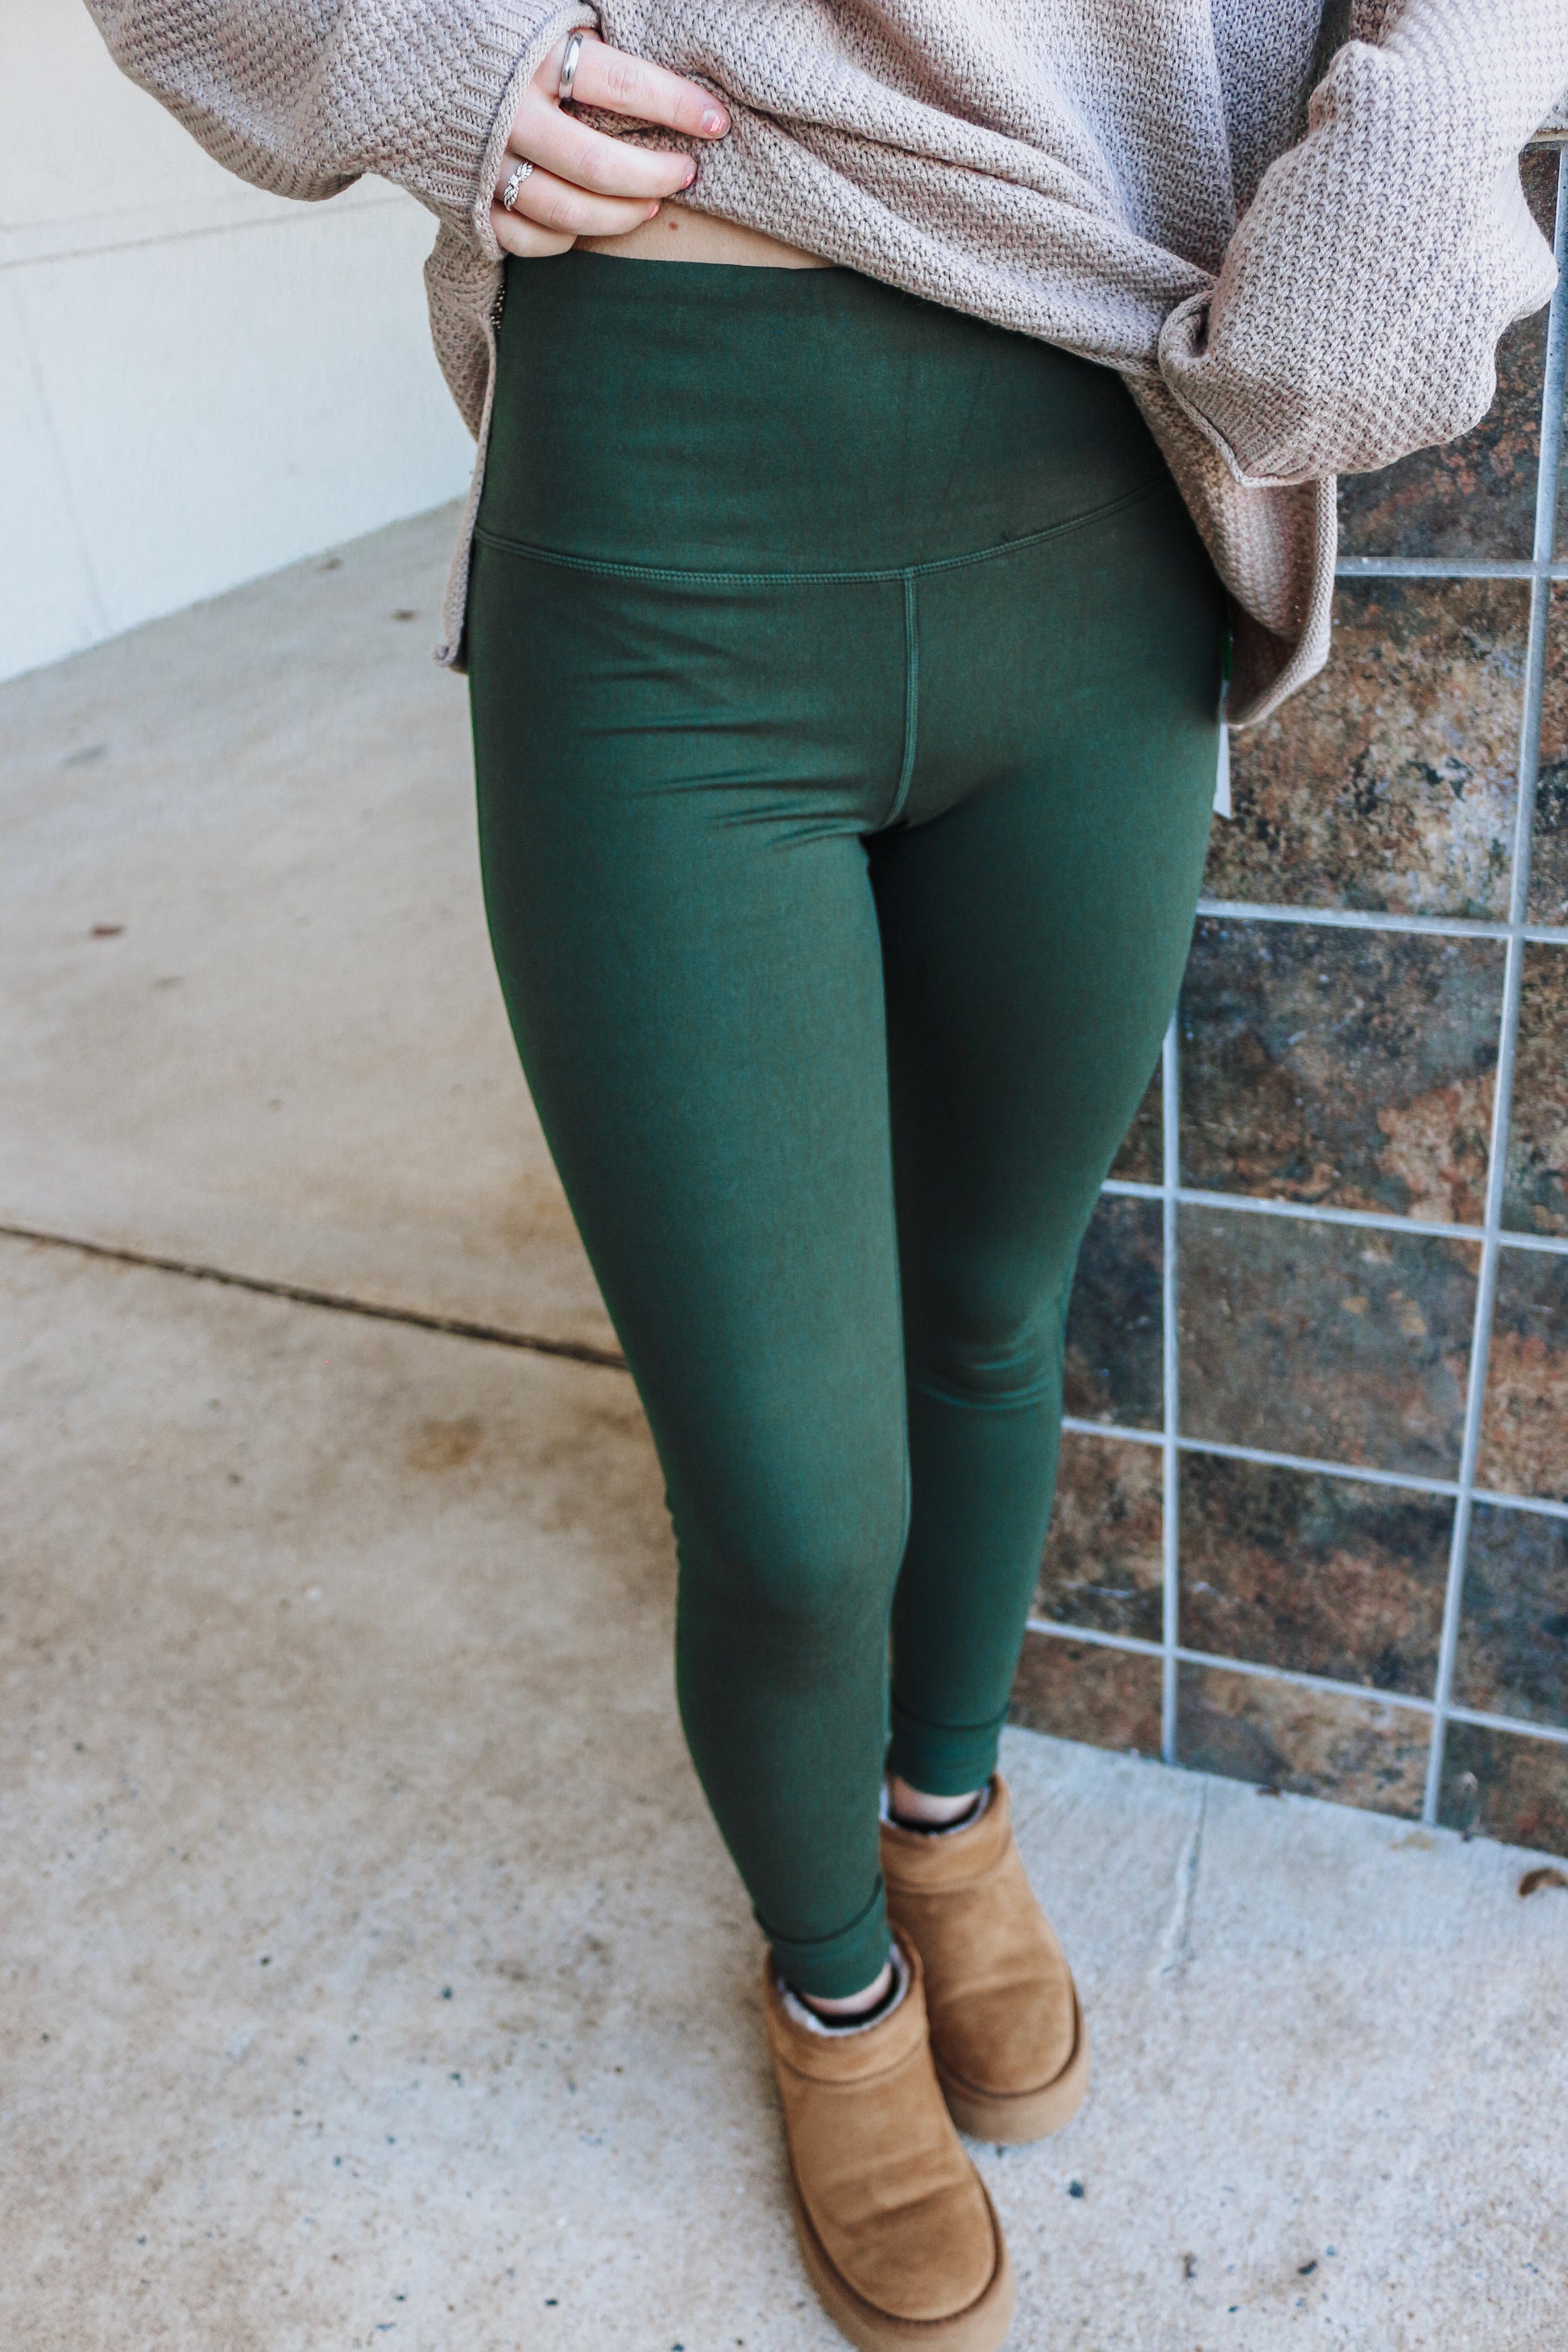 Forest Green Leggings  Green leggings outfit, Outfits with